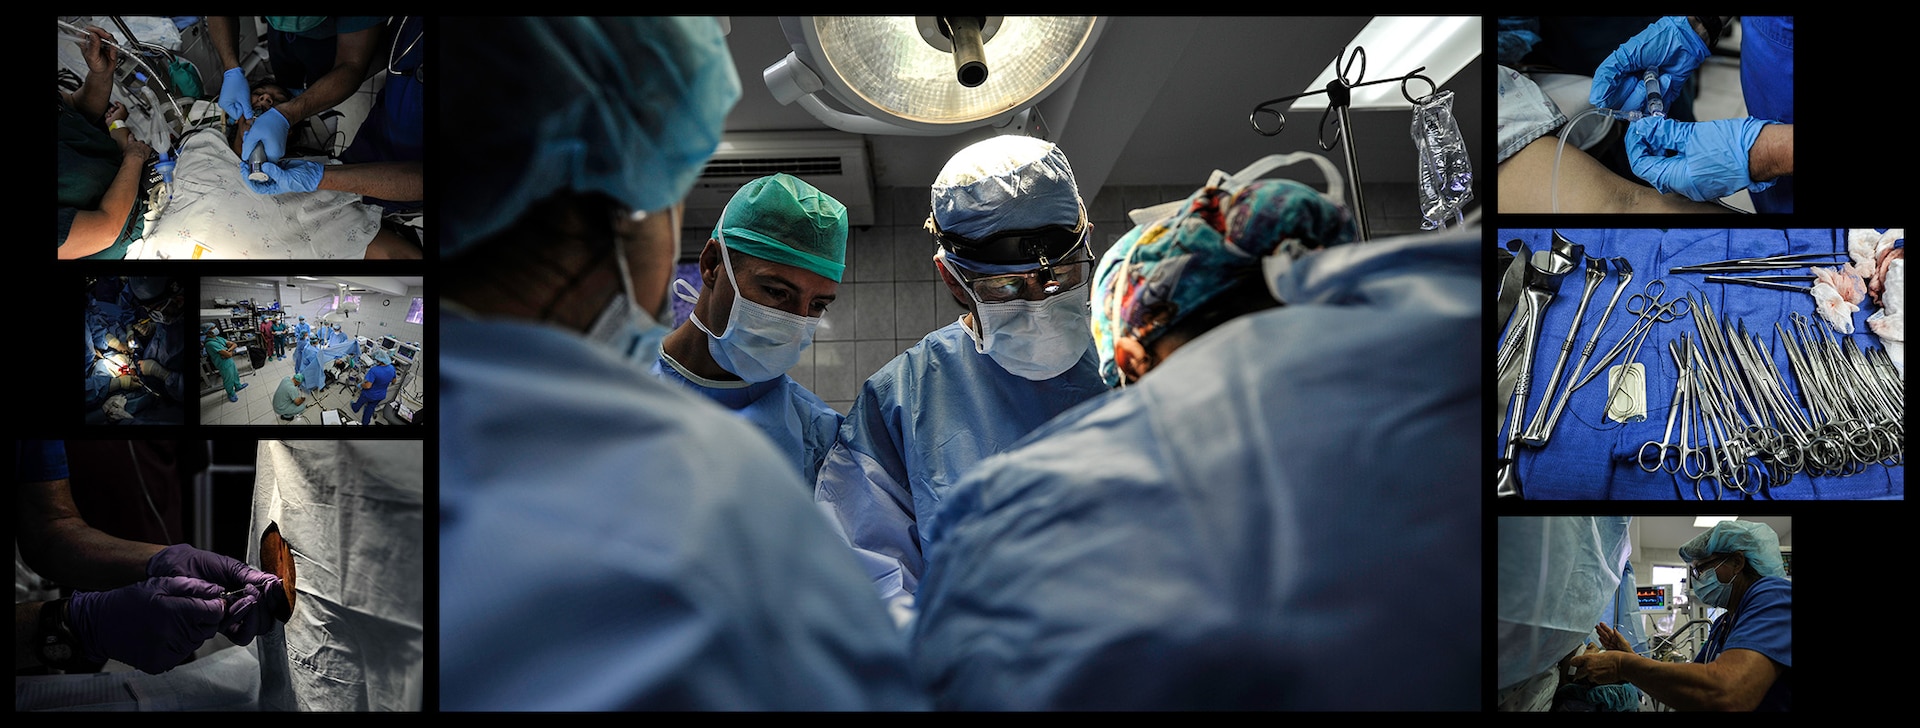 Every move counts for JTF-Bravo's Mobile Surgical Team > U.S. 